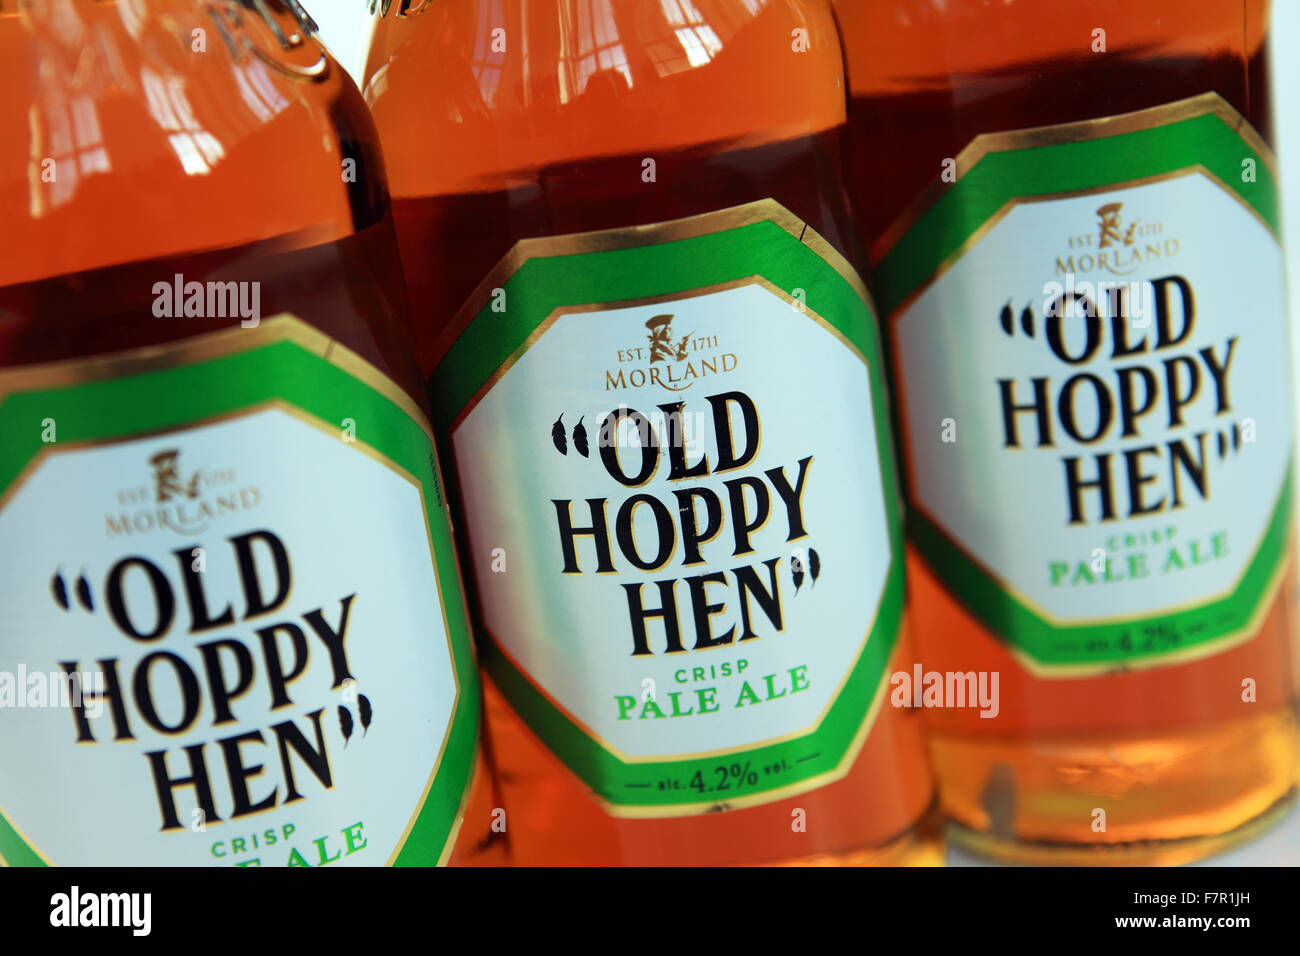 Bottles of Old Hoppy Hen Pale Ale brewed by Morland Stock Photo